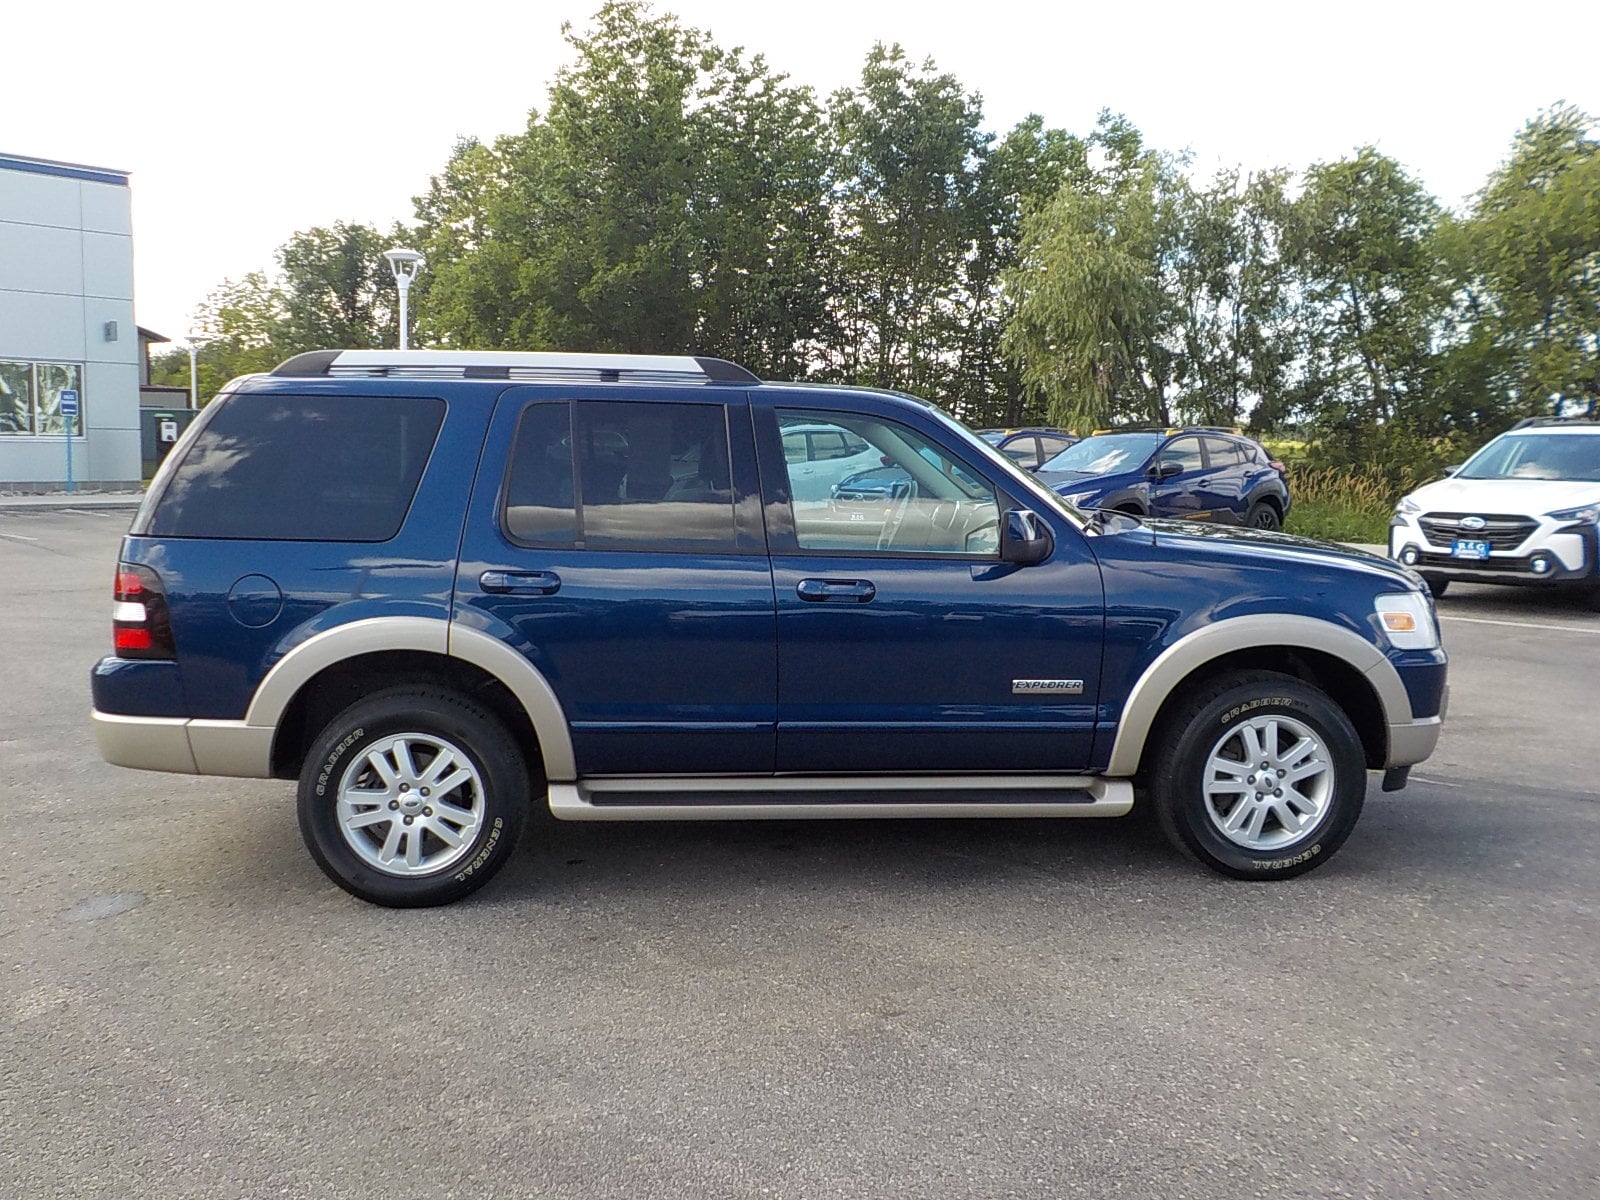 Used 2007 Ford Explorer Eddie Bauer with VIN 1FMEU74E17UA97670 for sale in Detroit Lakes, Minnesota